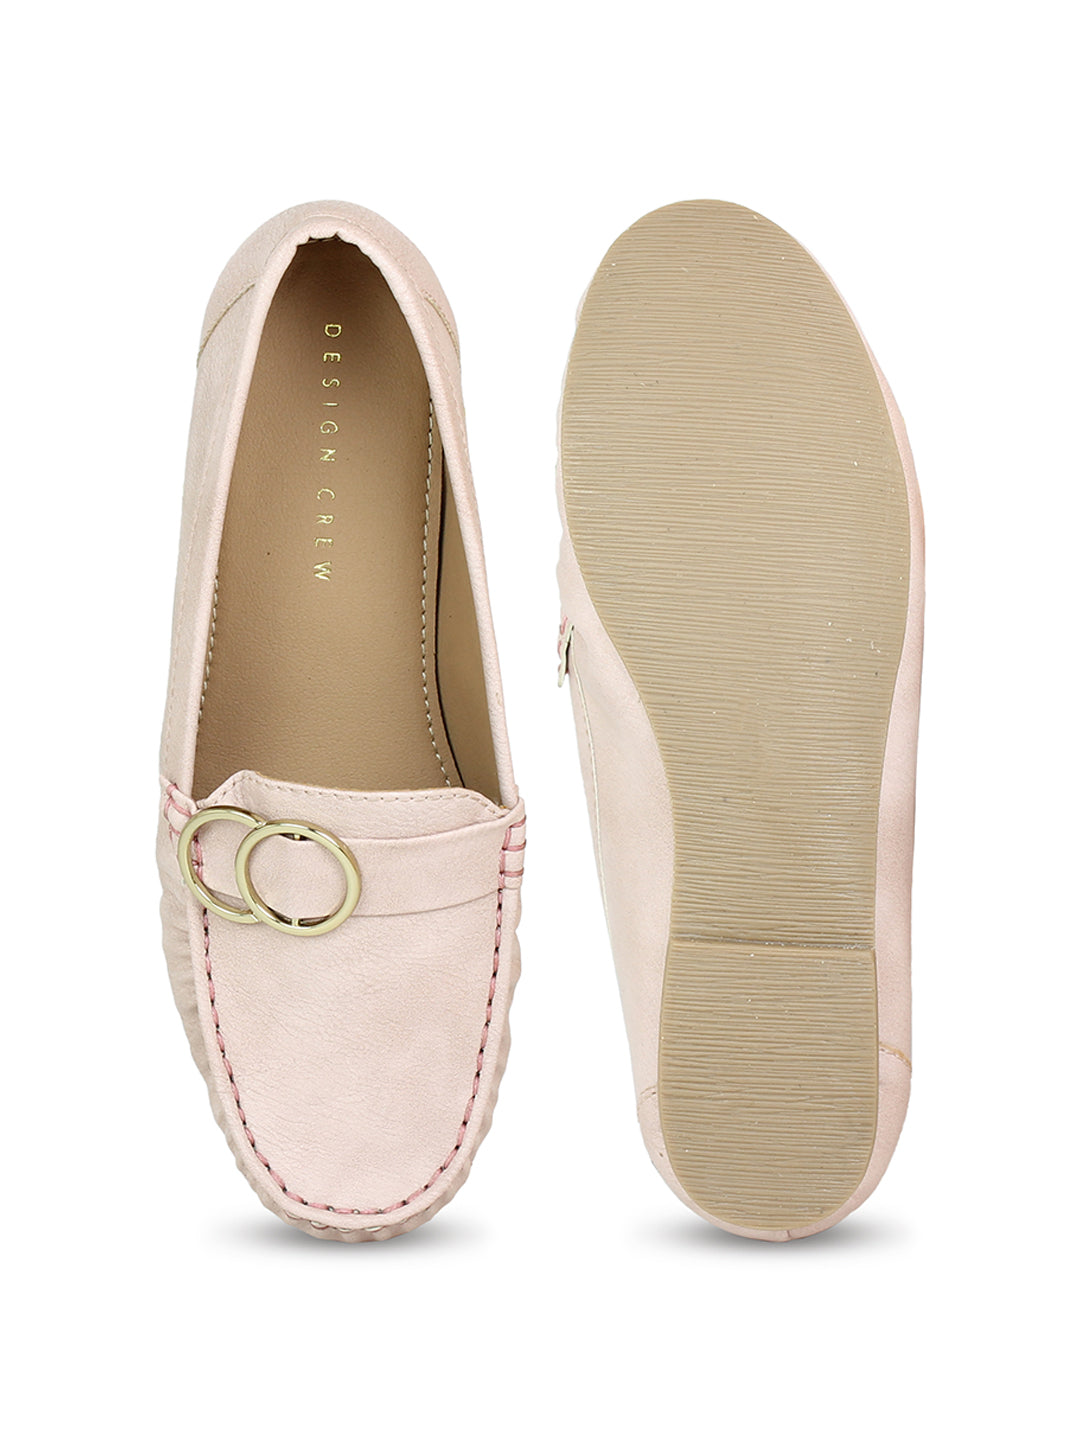 Faux Leather Moccasins With Round Metal Trim